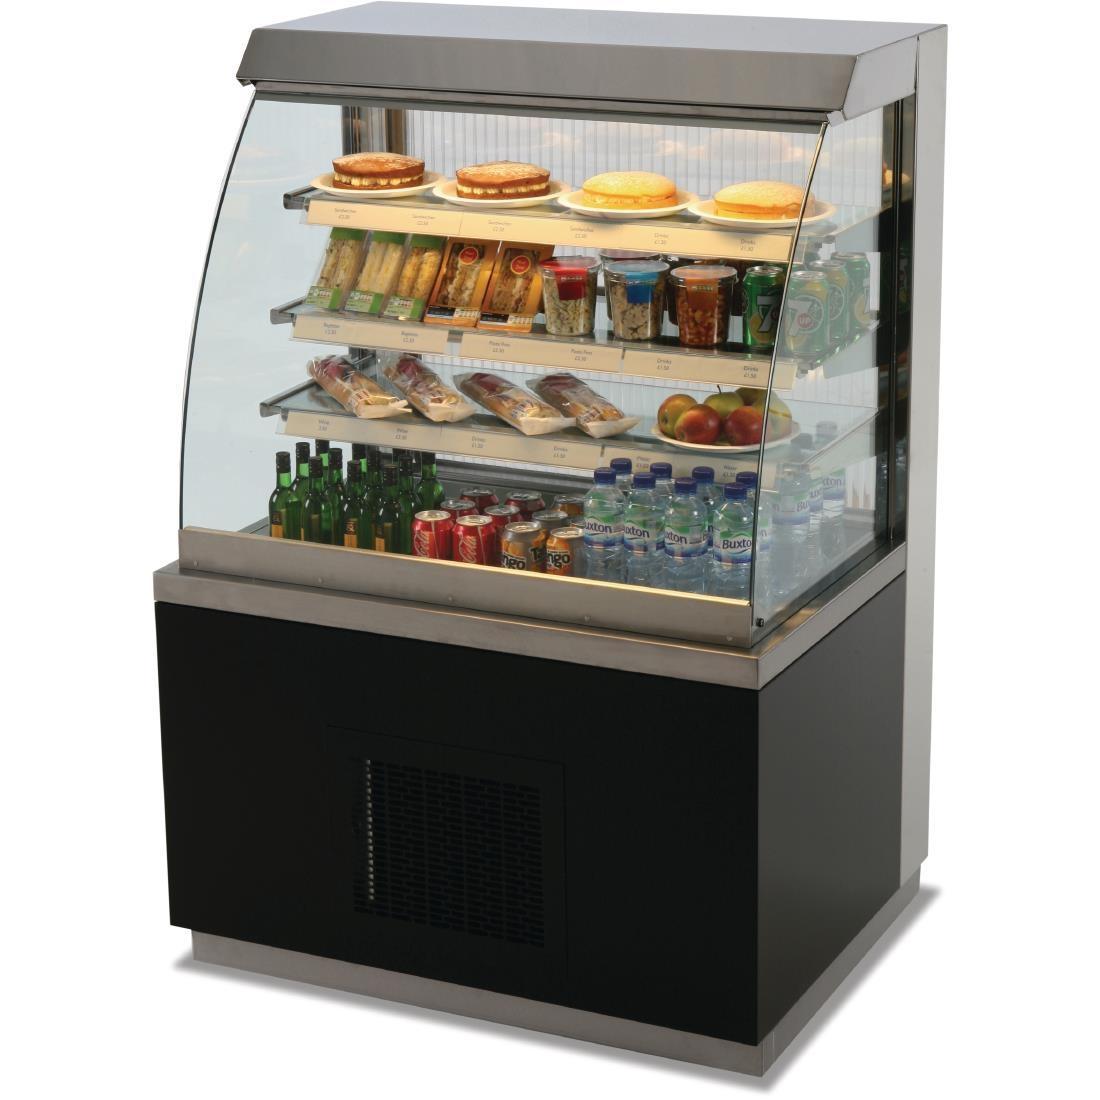 Victor Optimax Refrigerated Display Unit 1000mm - GL358  - 1